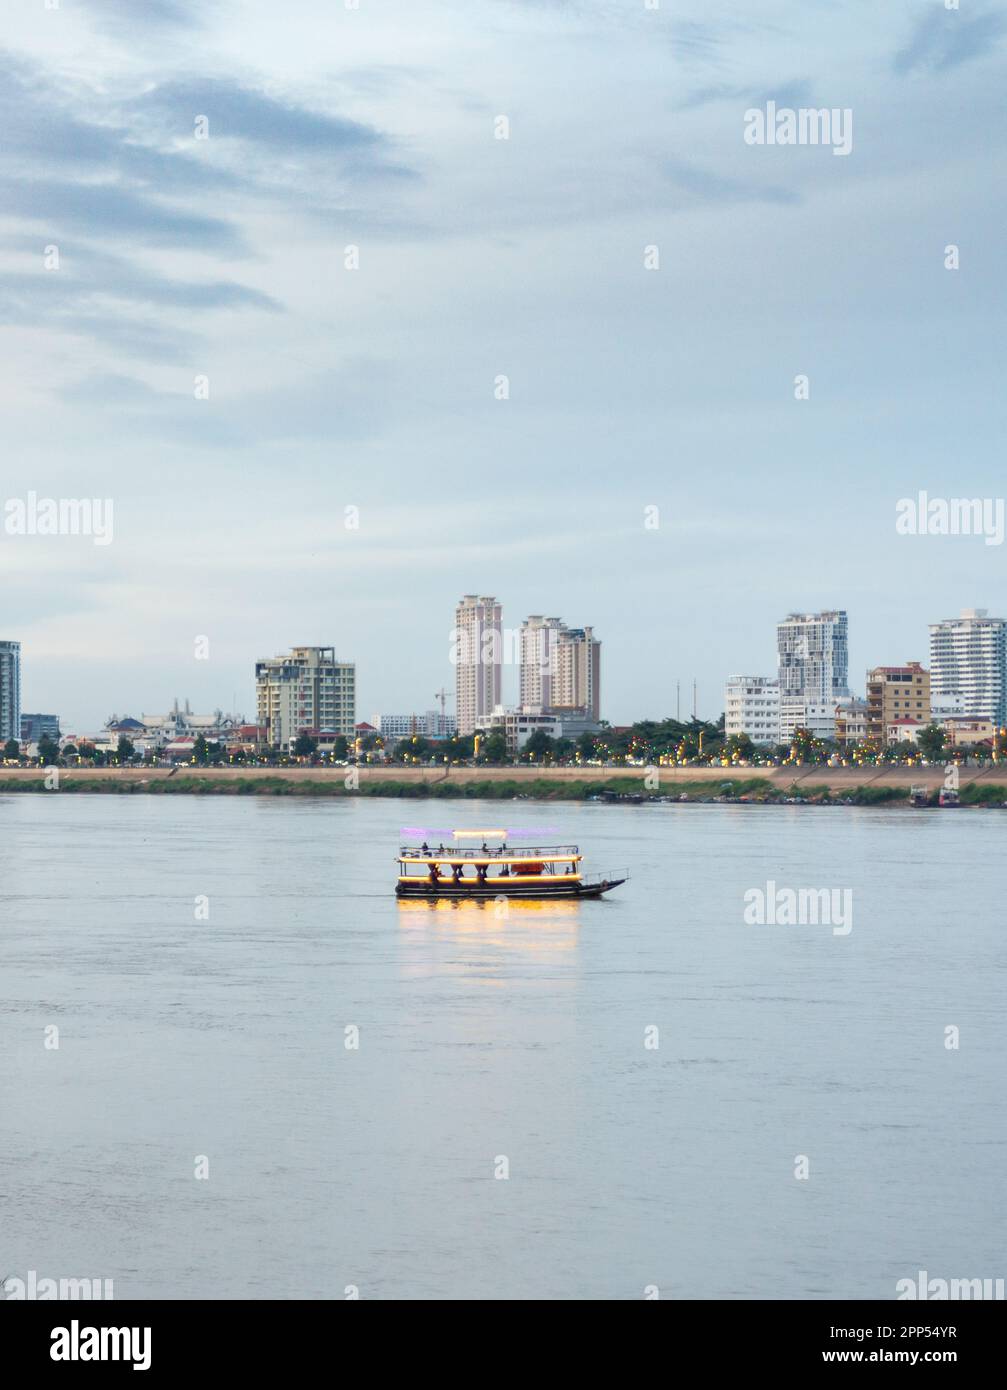 Lit up,carrying tourists up and down,to see Cambodia's capital city landmarks and the Mekong River,the sun has set,it is blue hour before dark,low tid Stock Photo